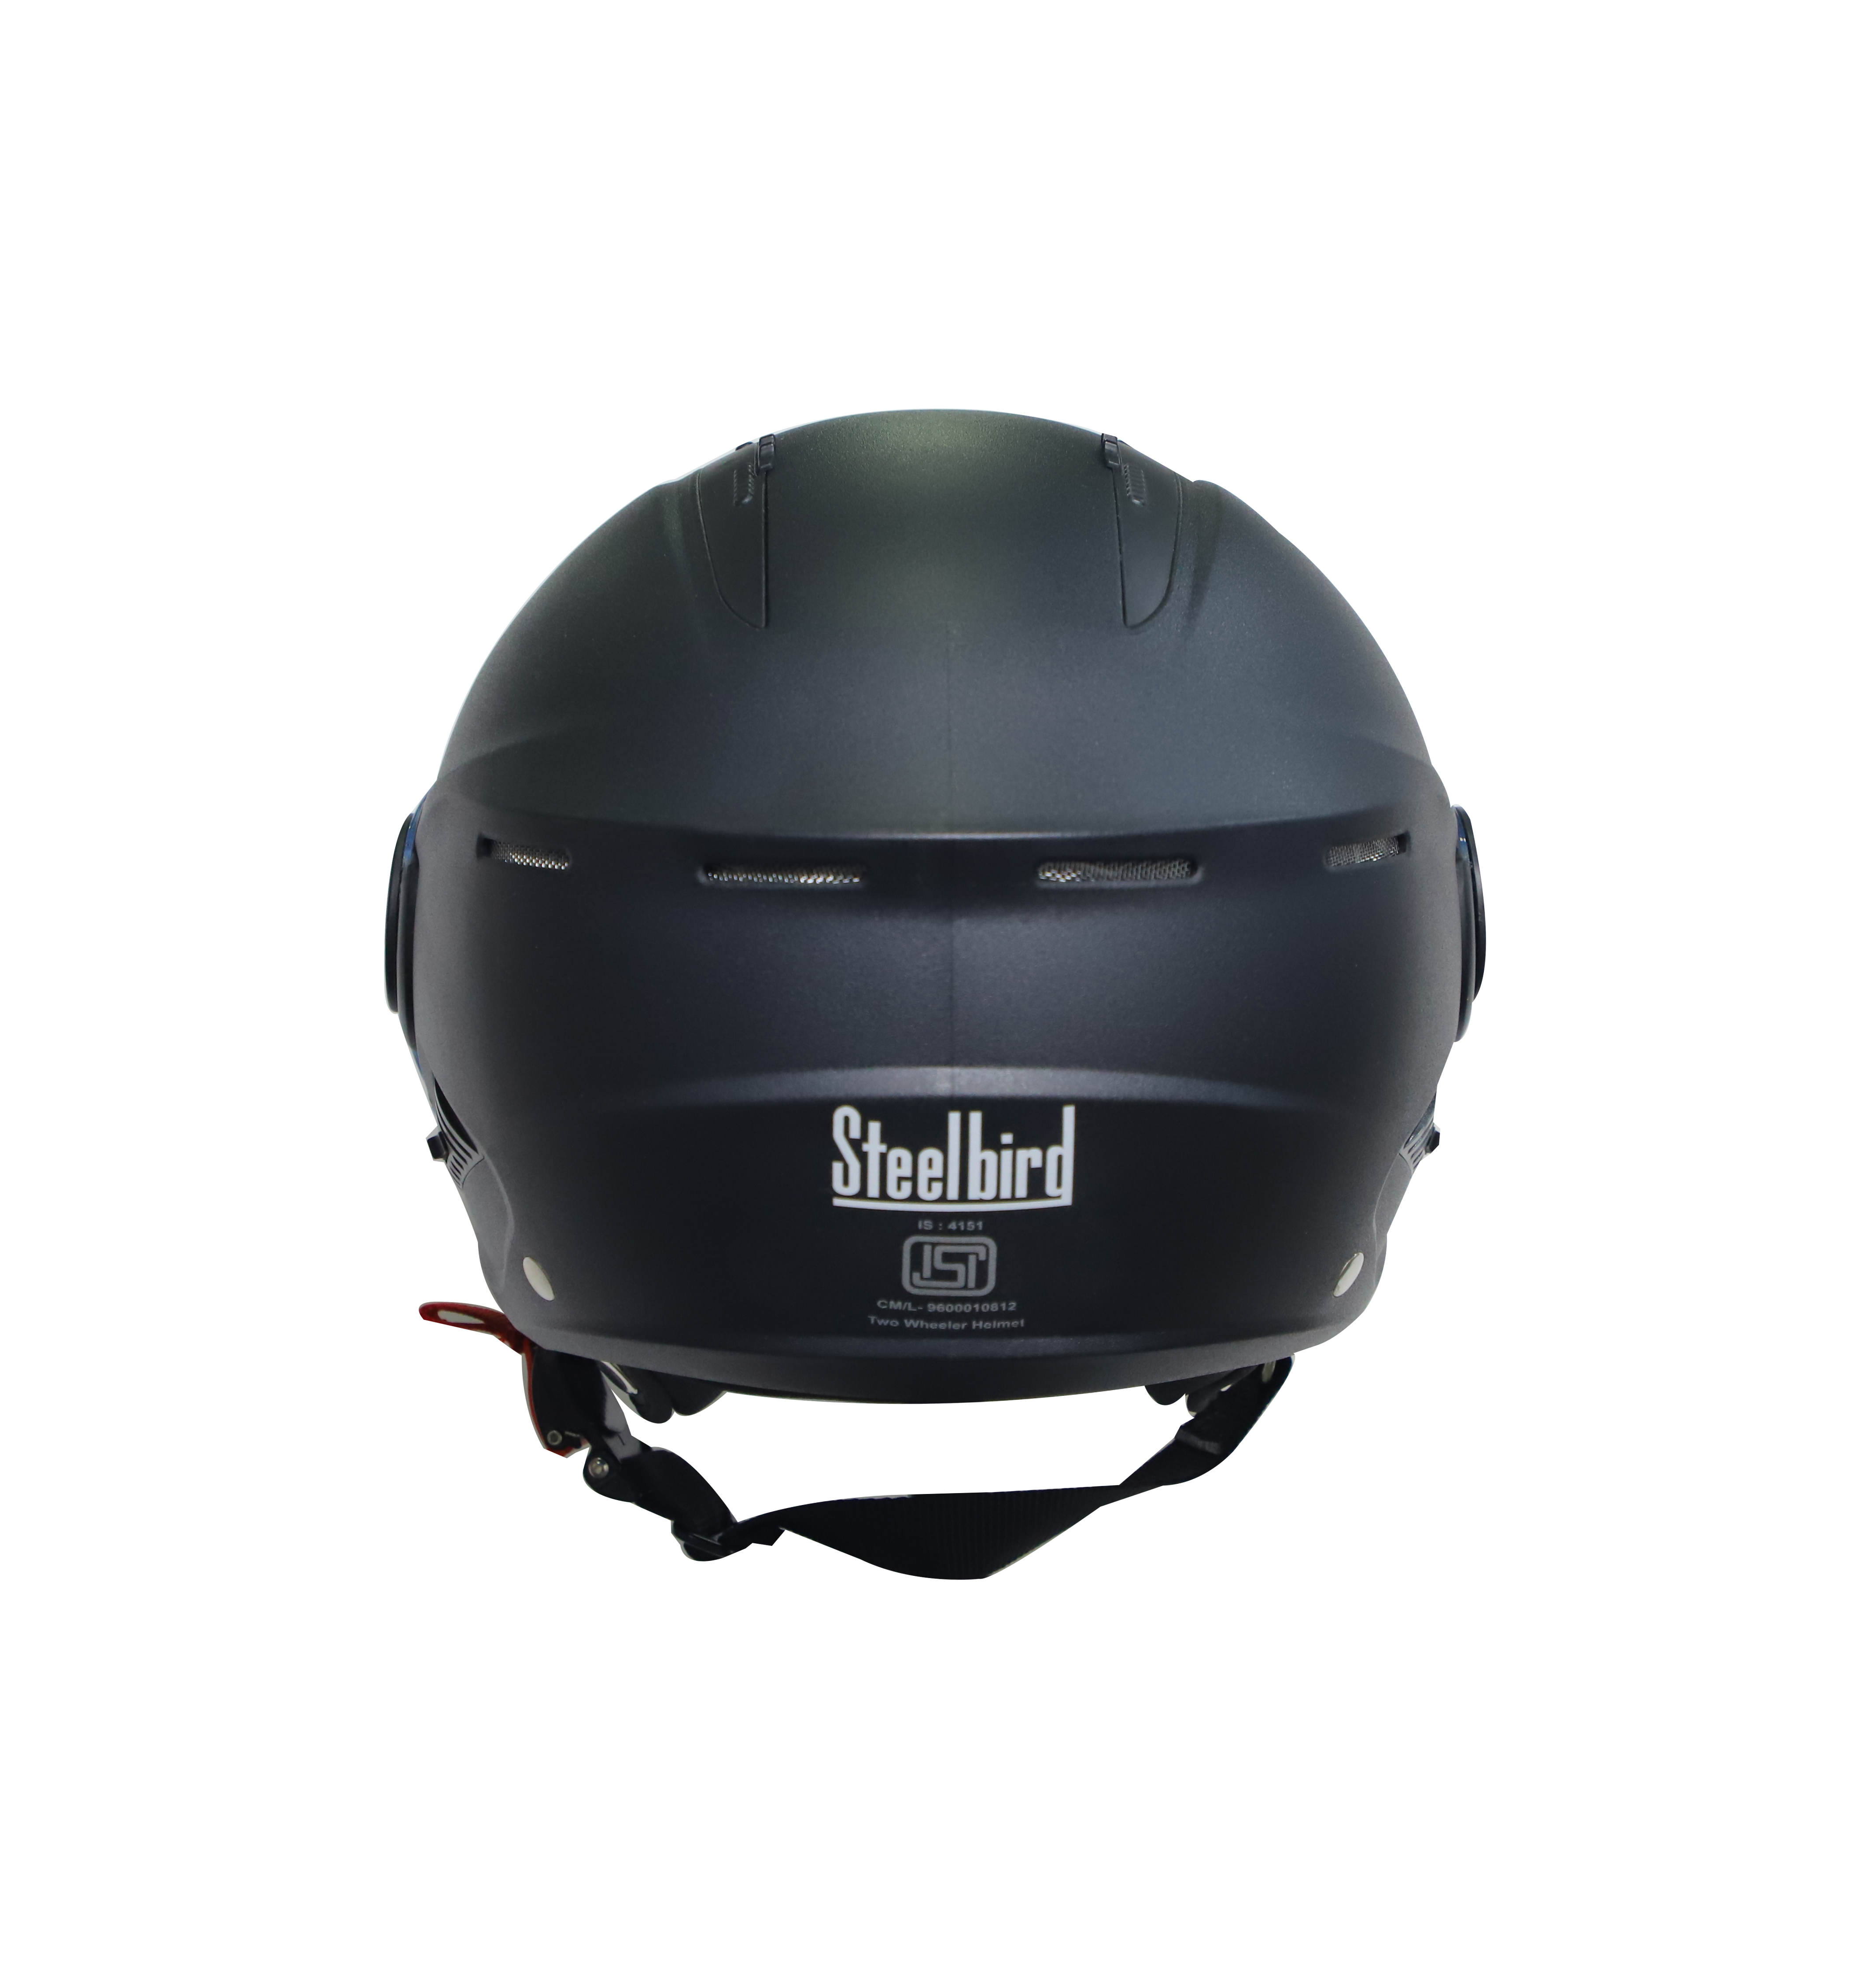 Steelbird SBH-24 Boxx Dashing ISI Certified Open Face Helmet For Men And Women (Dashing Black With Clear Visor)